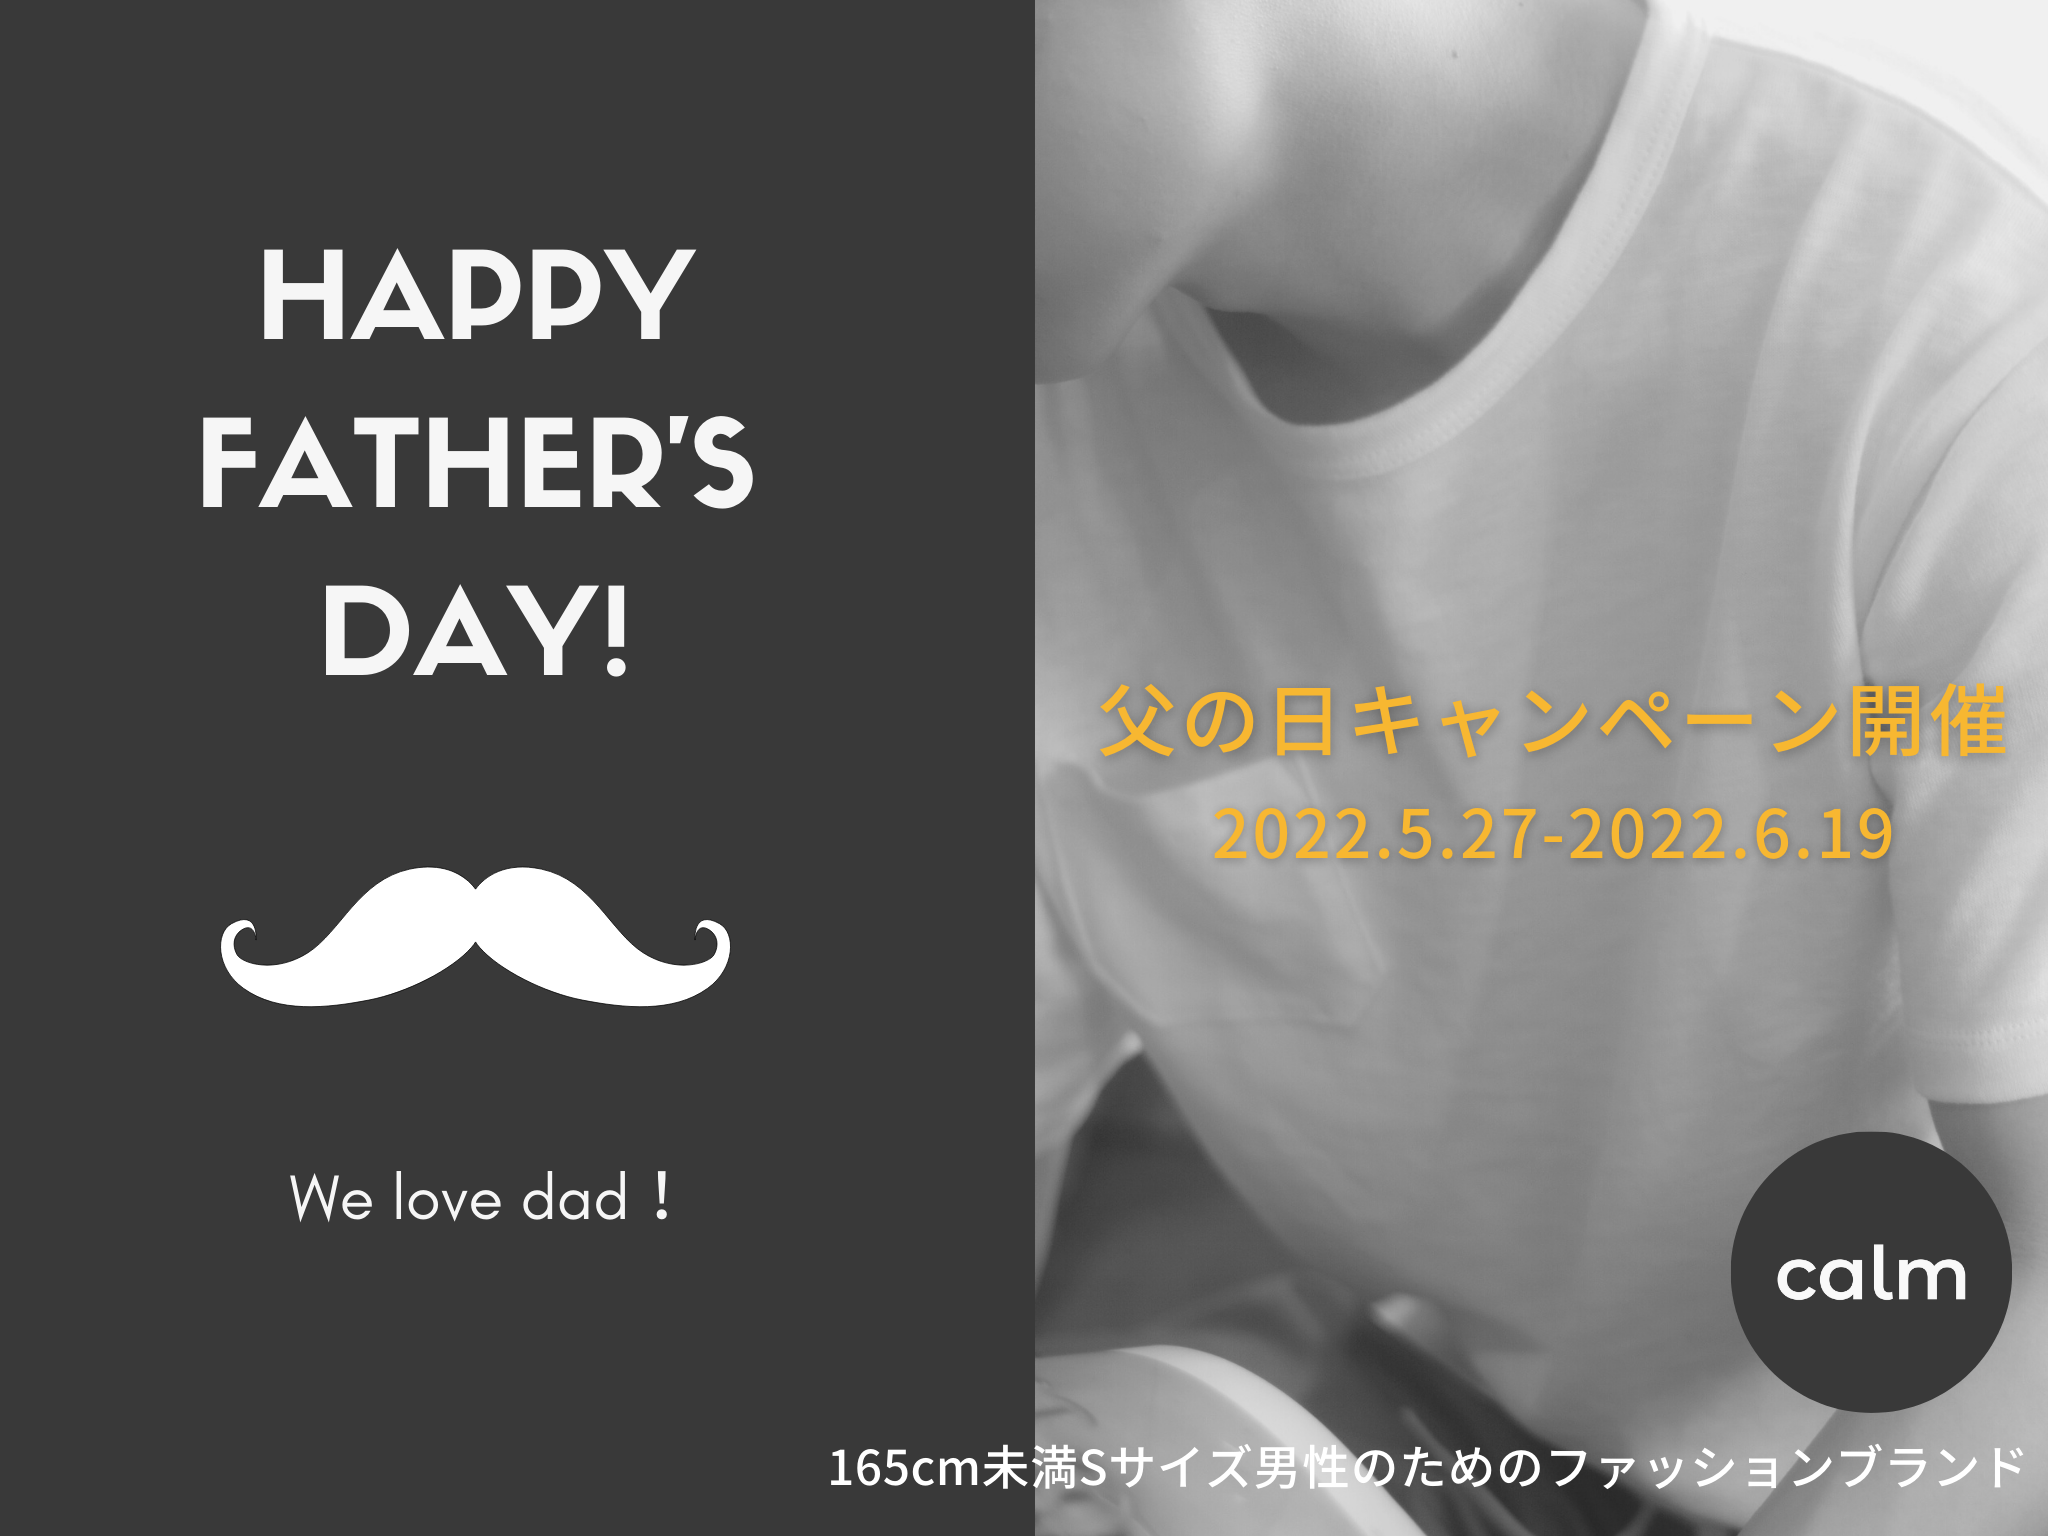 HAPPY FATHER'S DAYキャンペーン（2022.5.27）